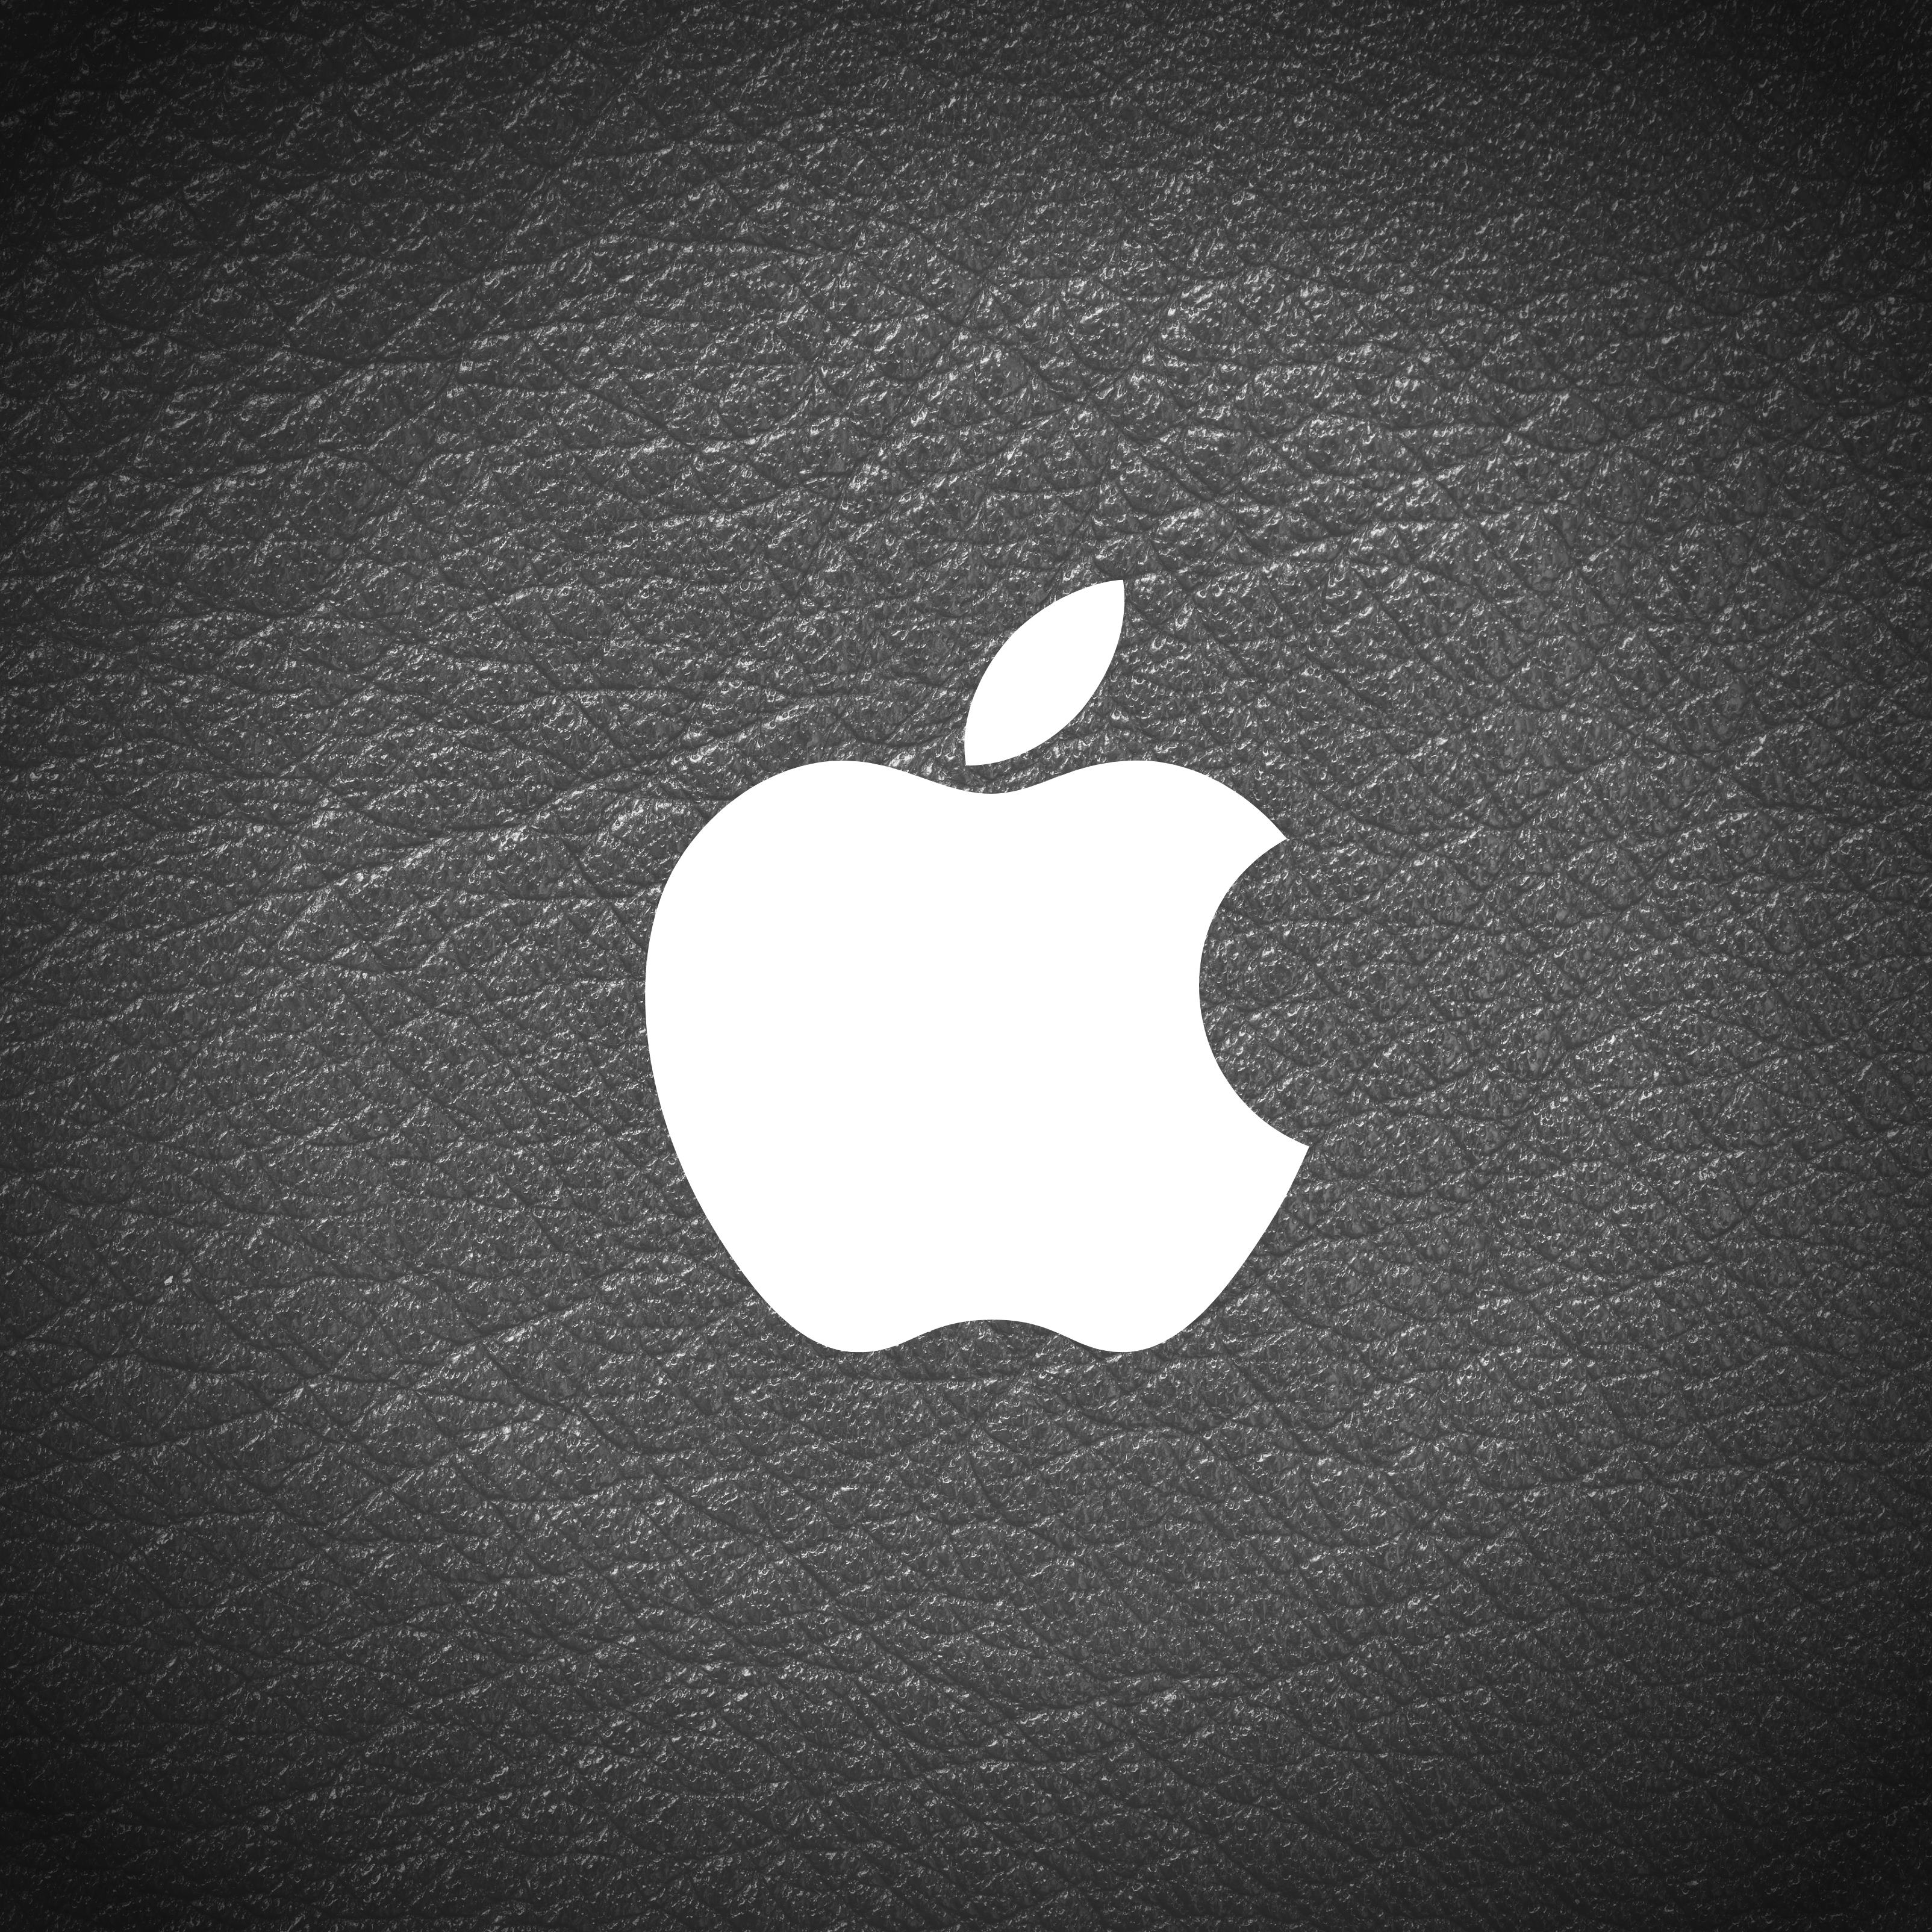 iPad Pro 10.5 wallpapers Apple Logo Leather Black and White iPad Wallpaper